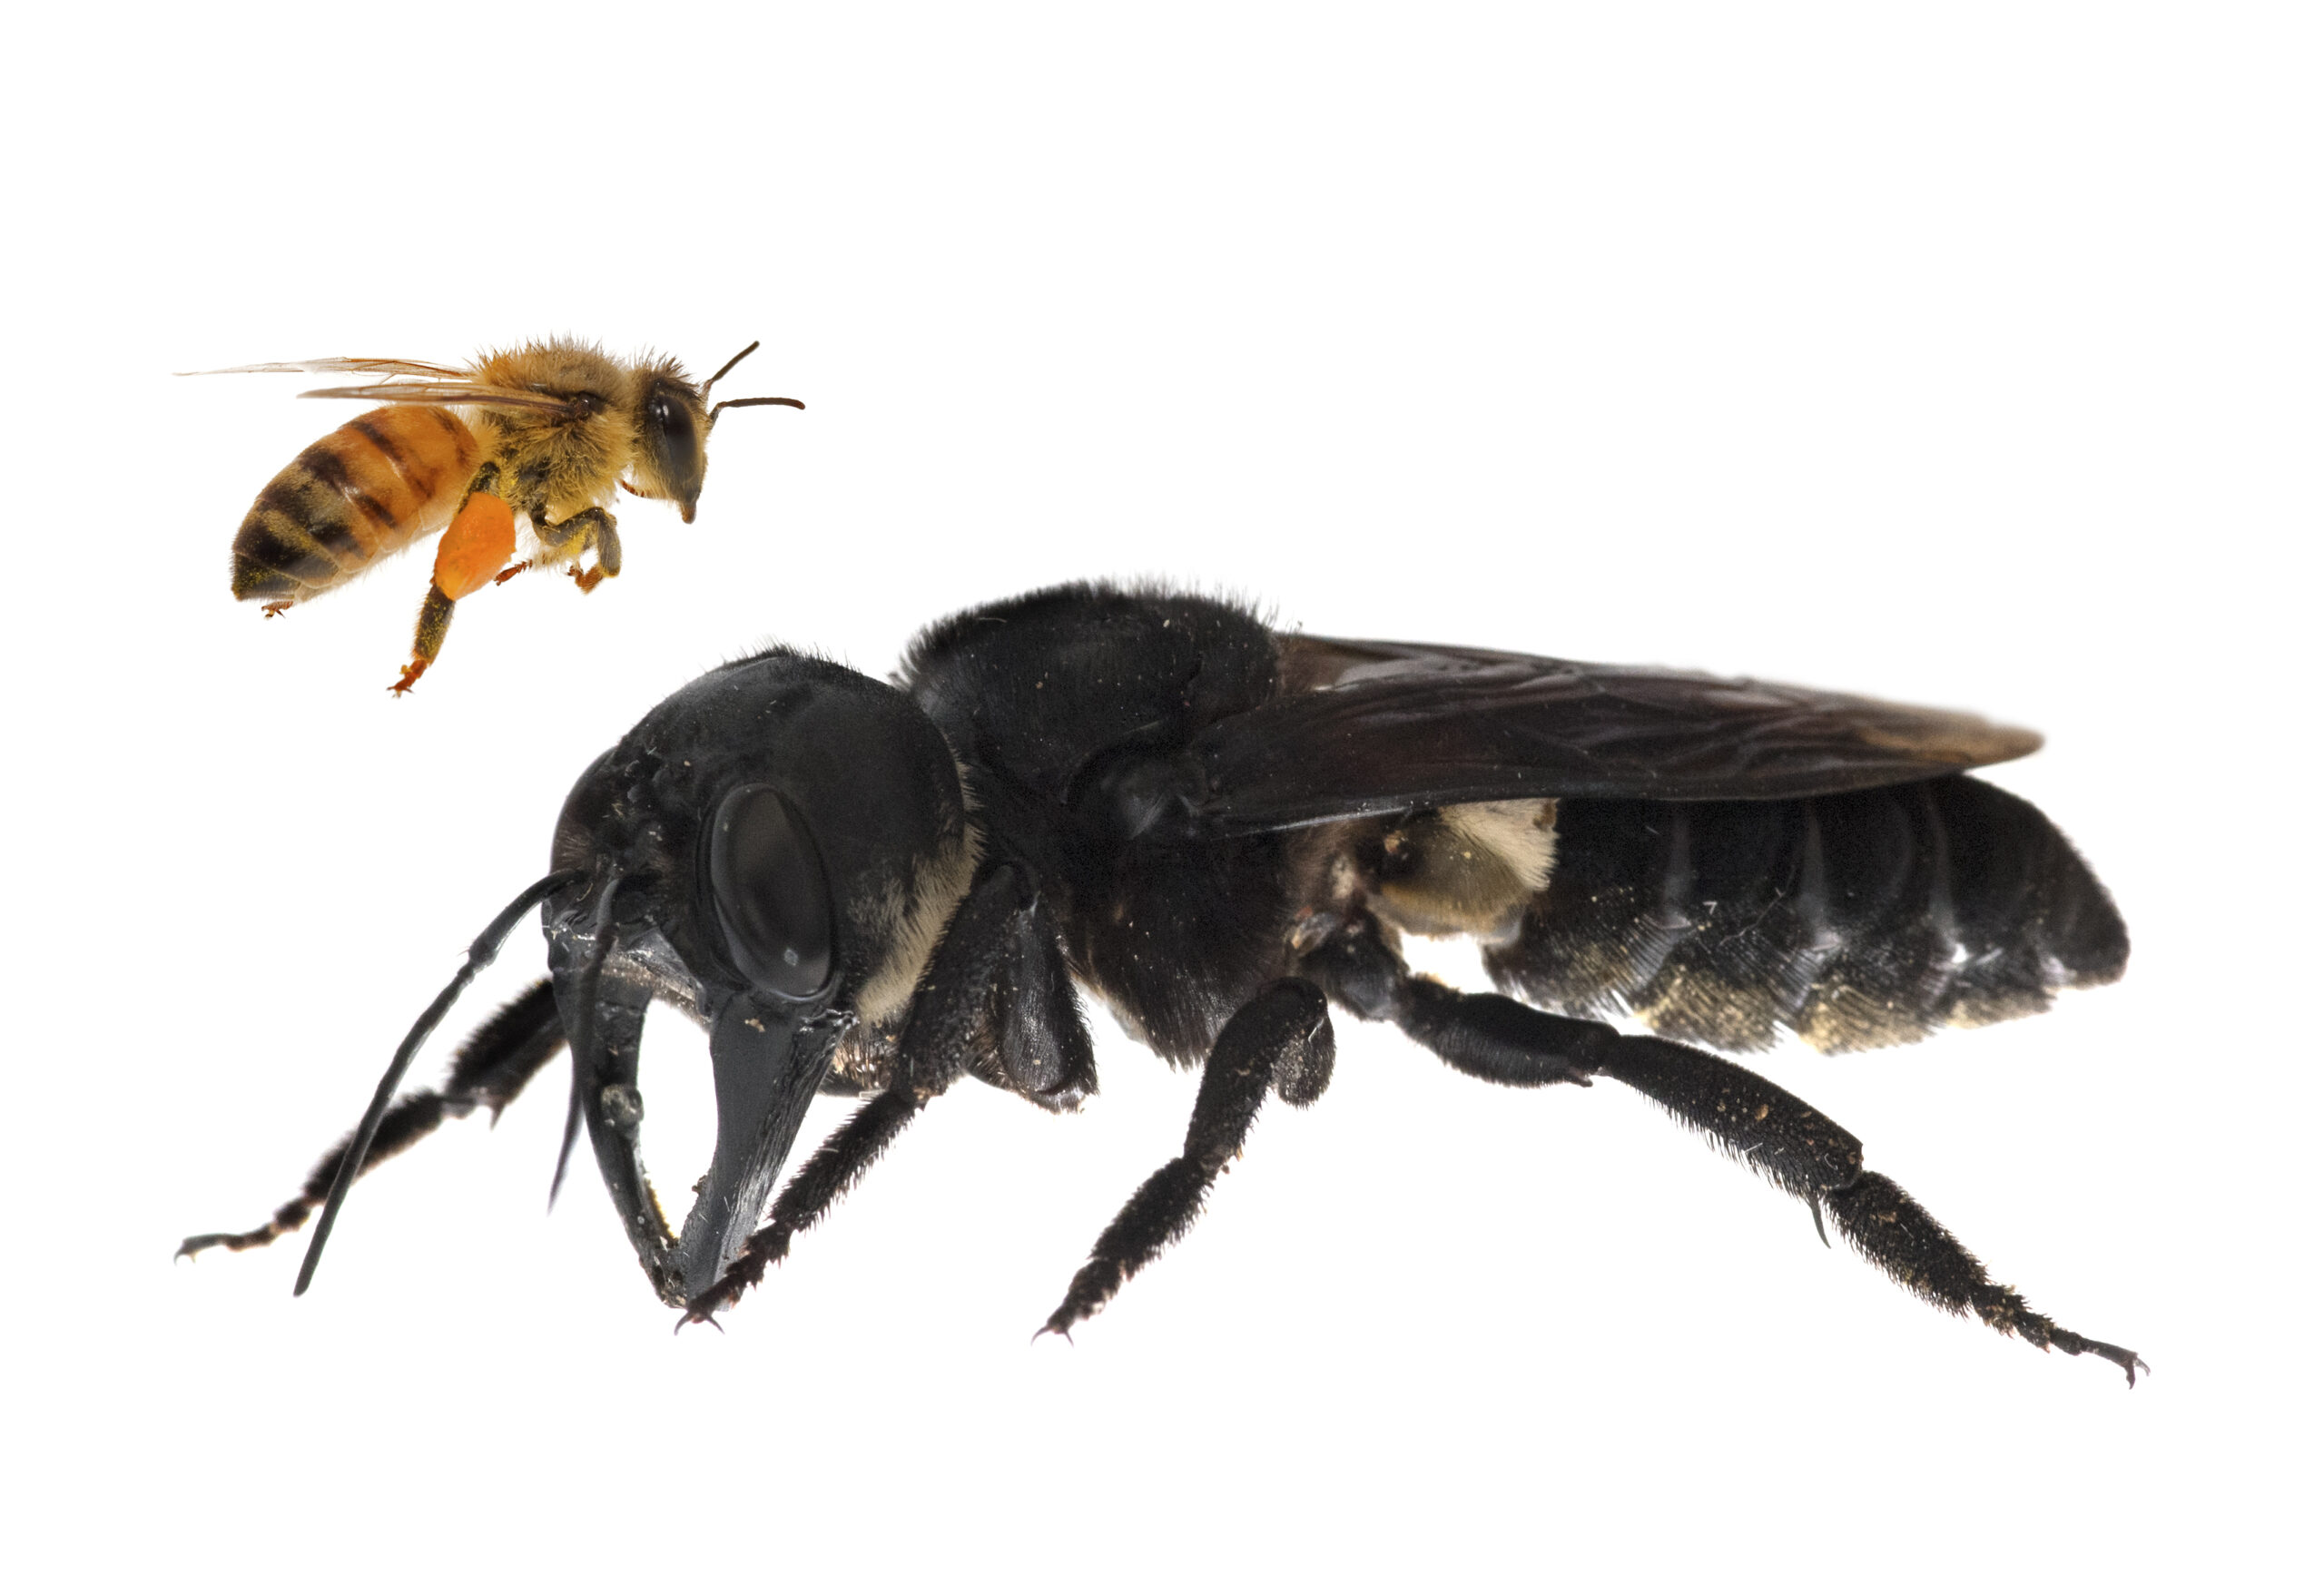 Scientists thought they lost the world’s largest bee, but it was hiding in plain sight